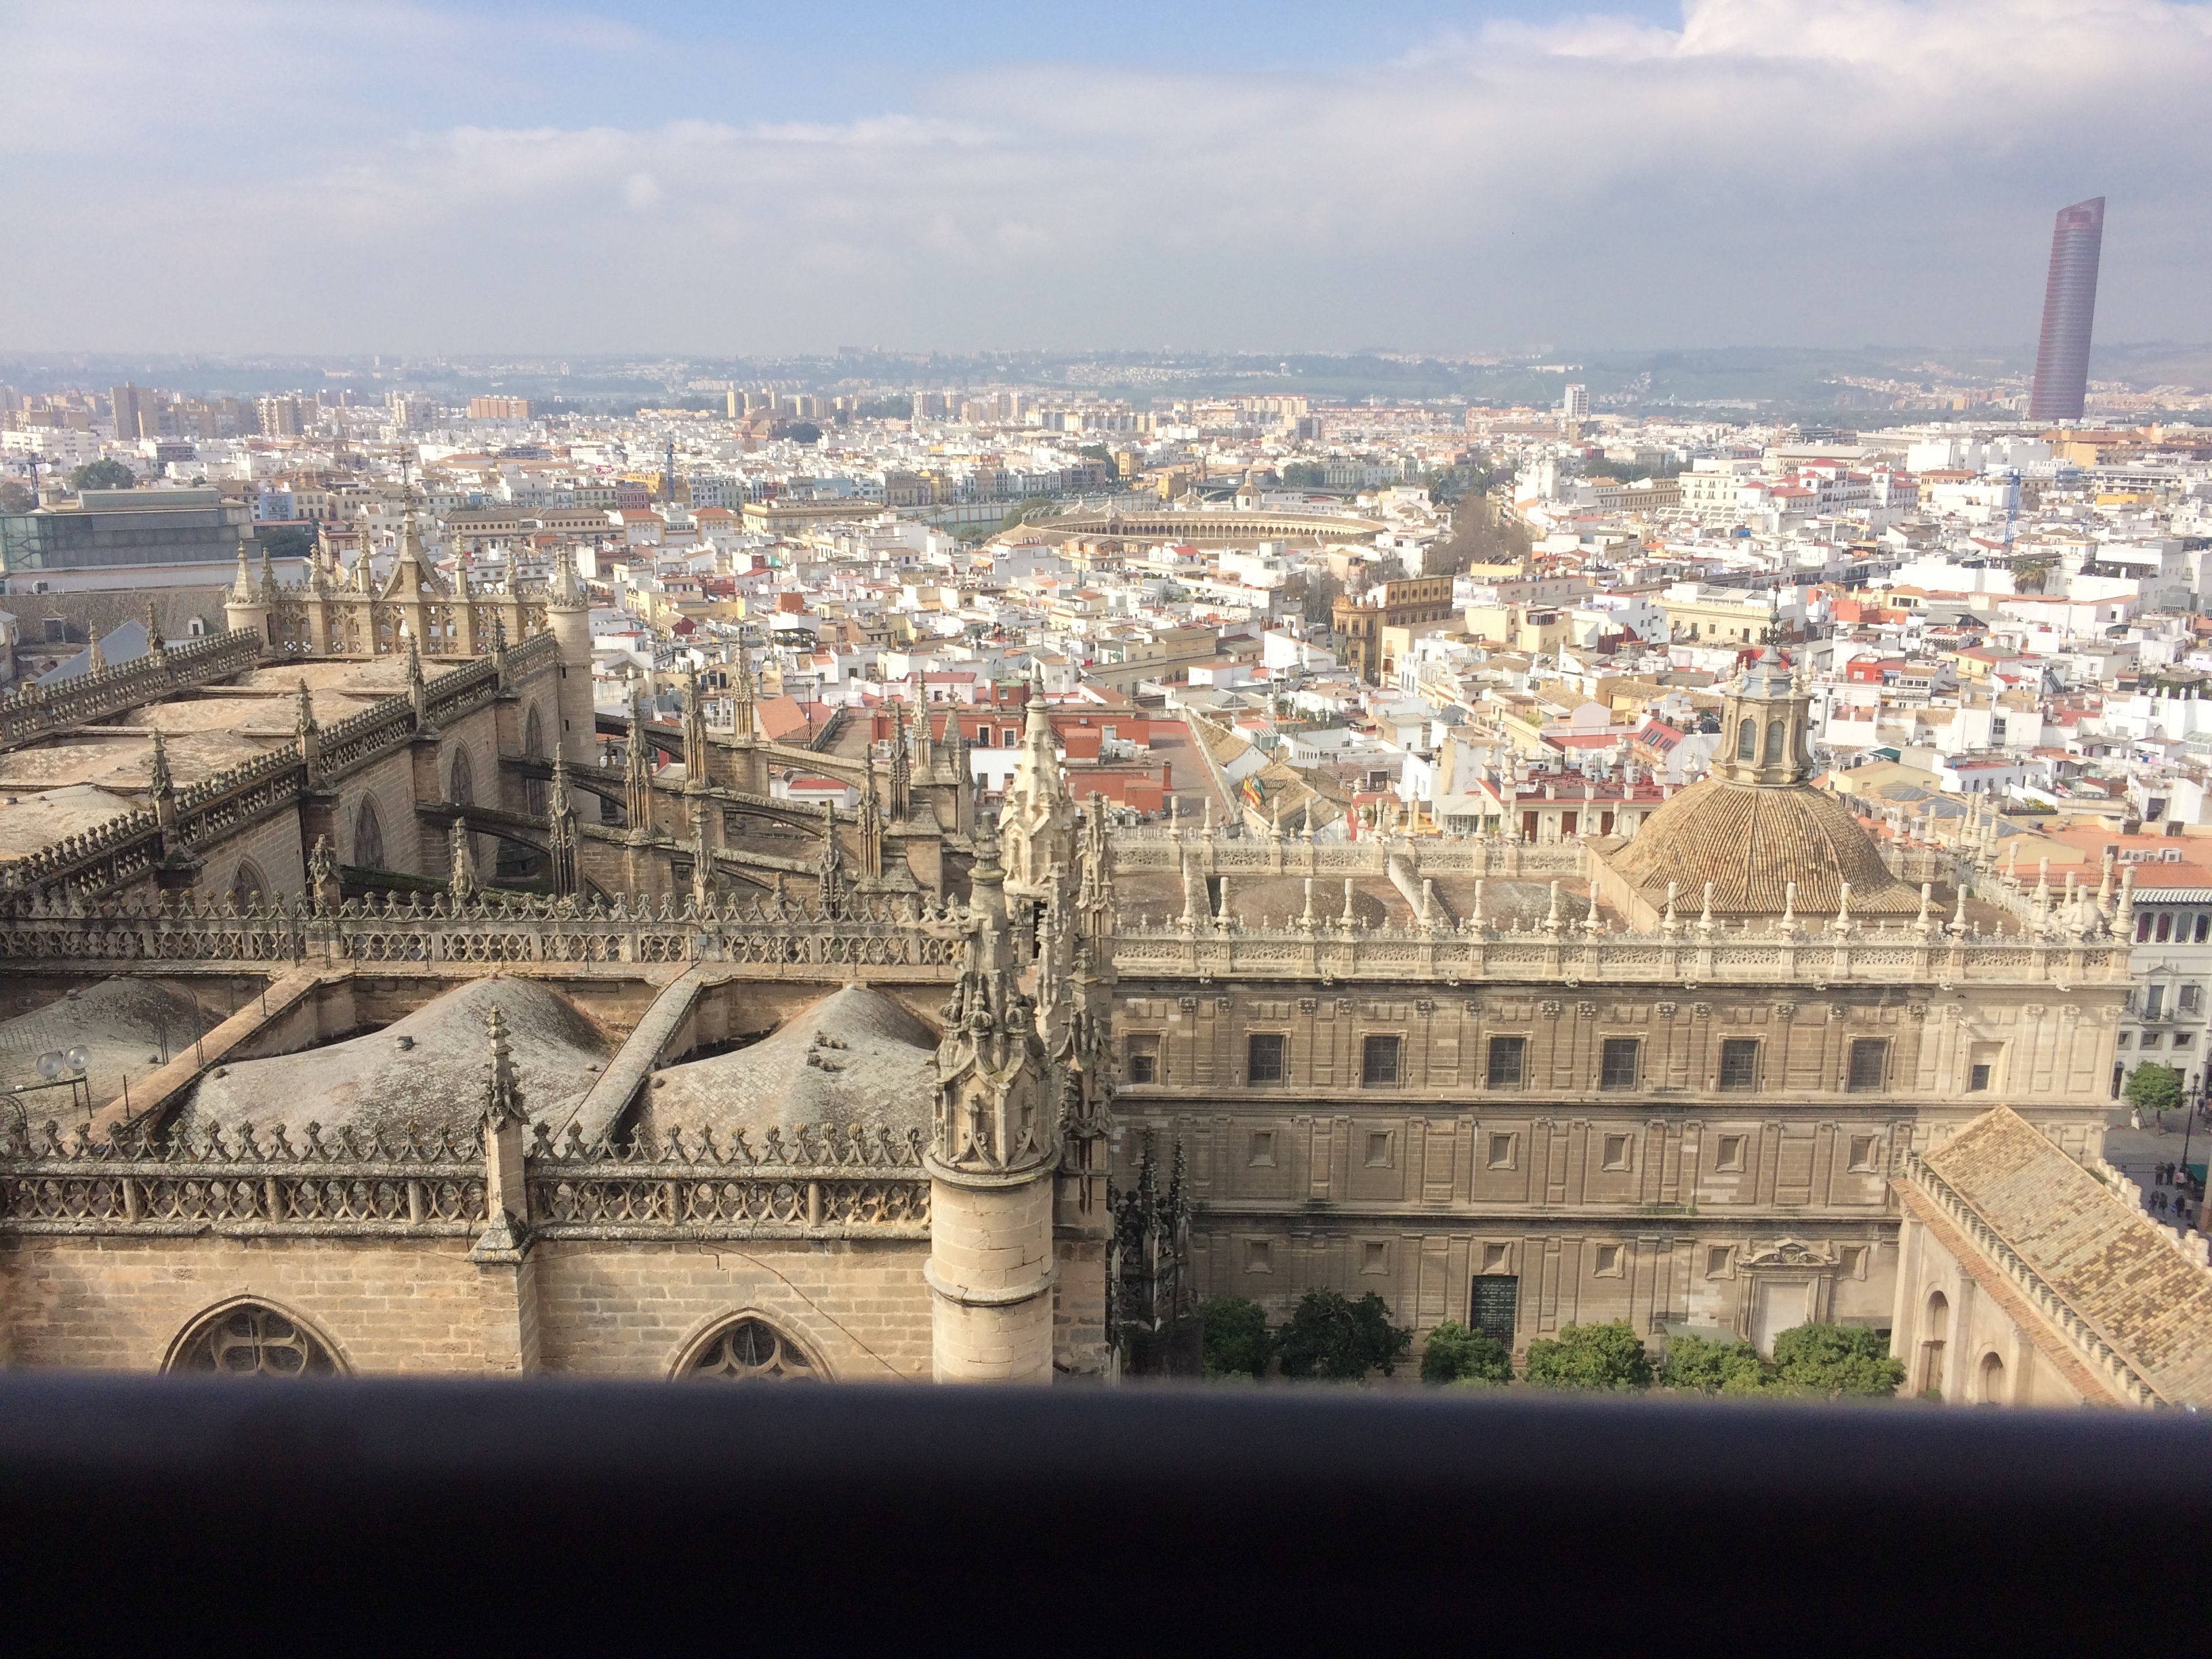 photogrpah I took from the top of the bell tower at a church in Seville, Spain